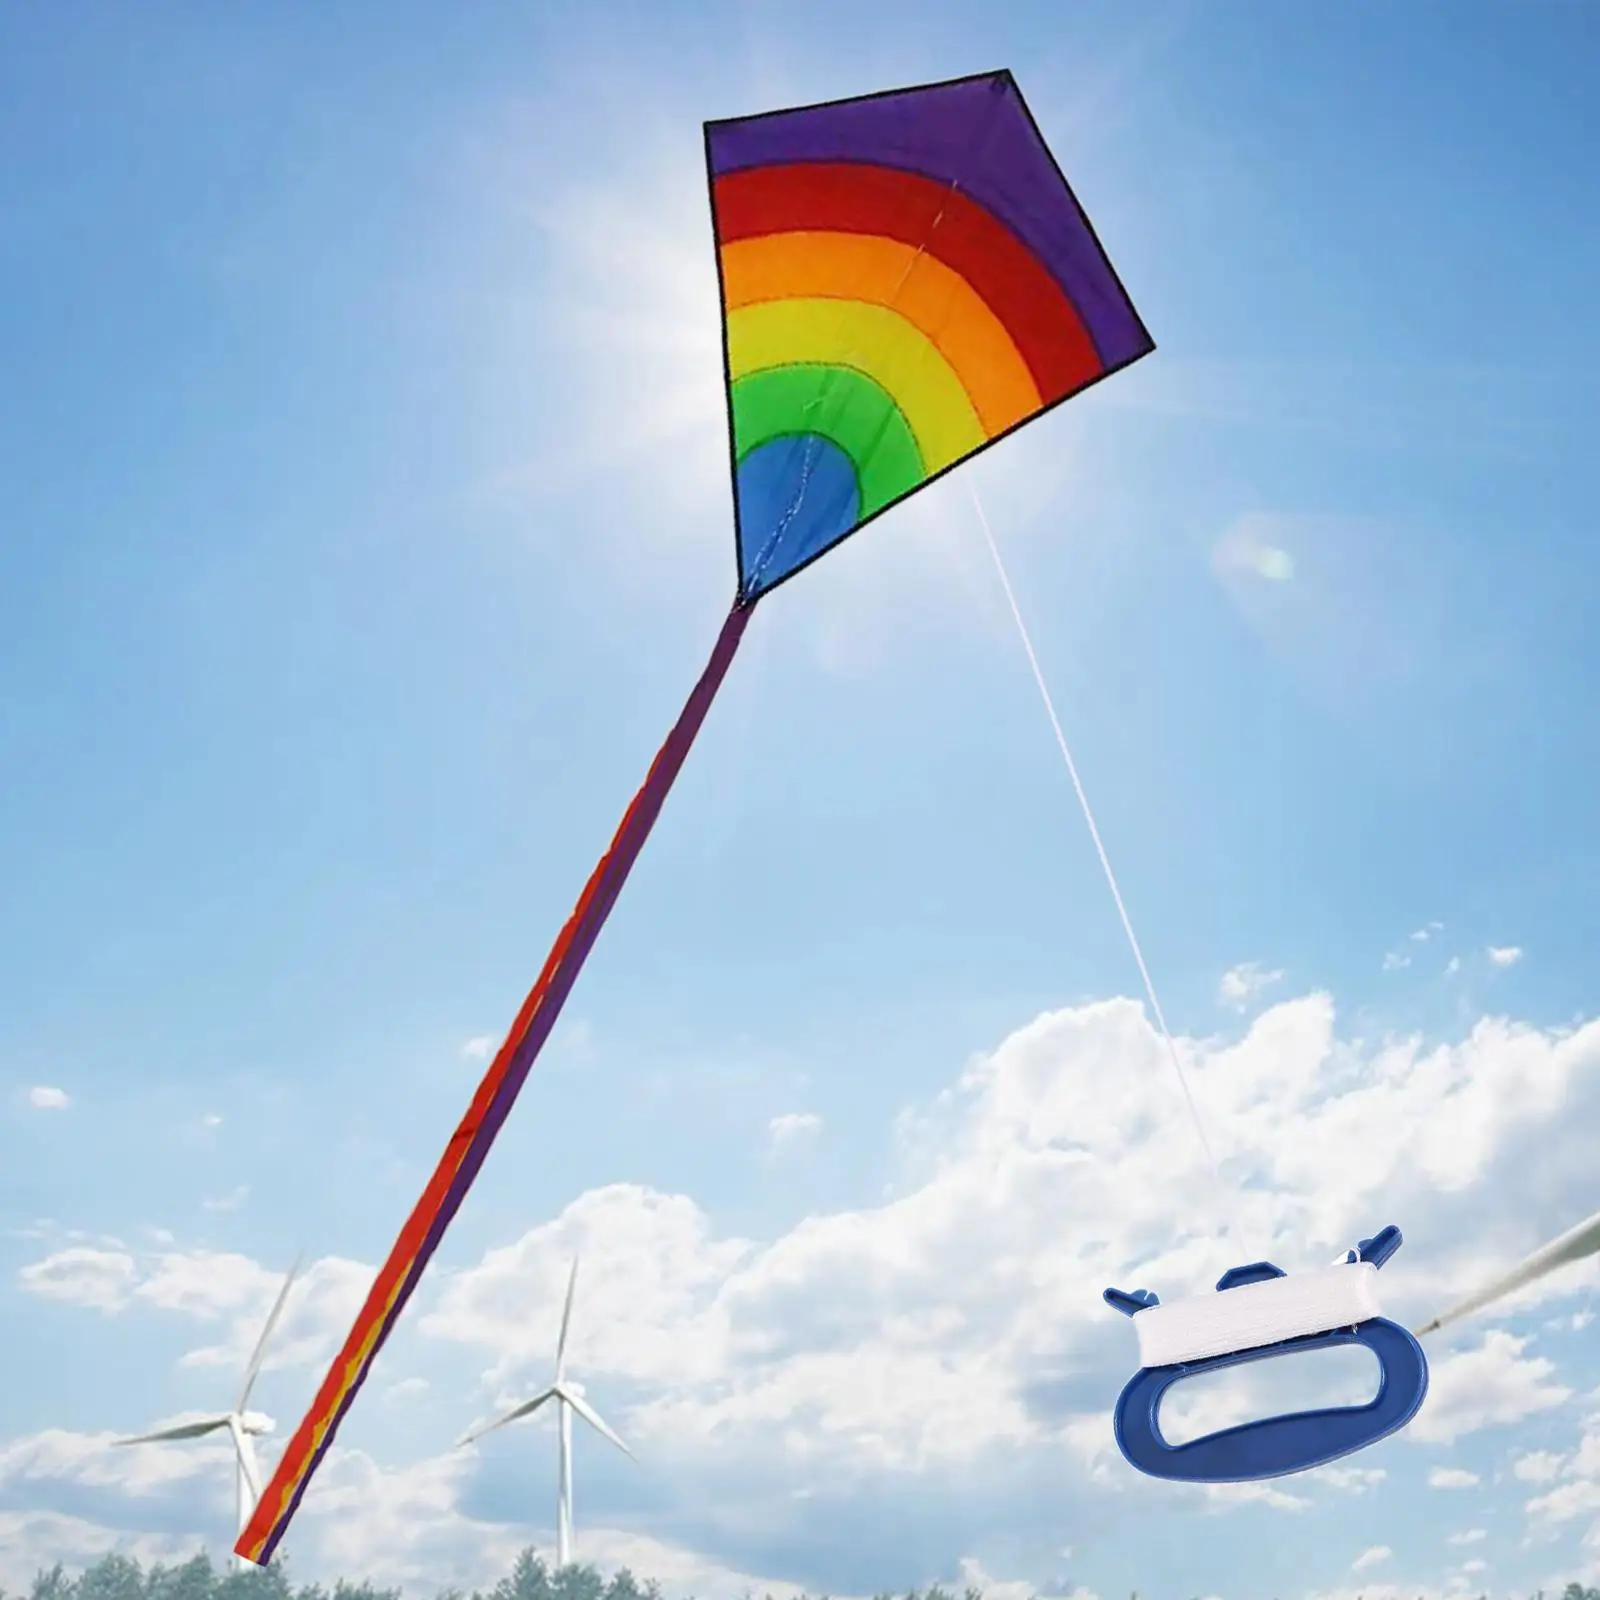 75x64cm Large Rainbow Diamond Kite with 6.56ft Long Tail for Beginners